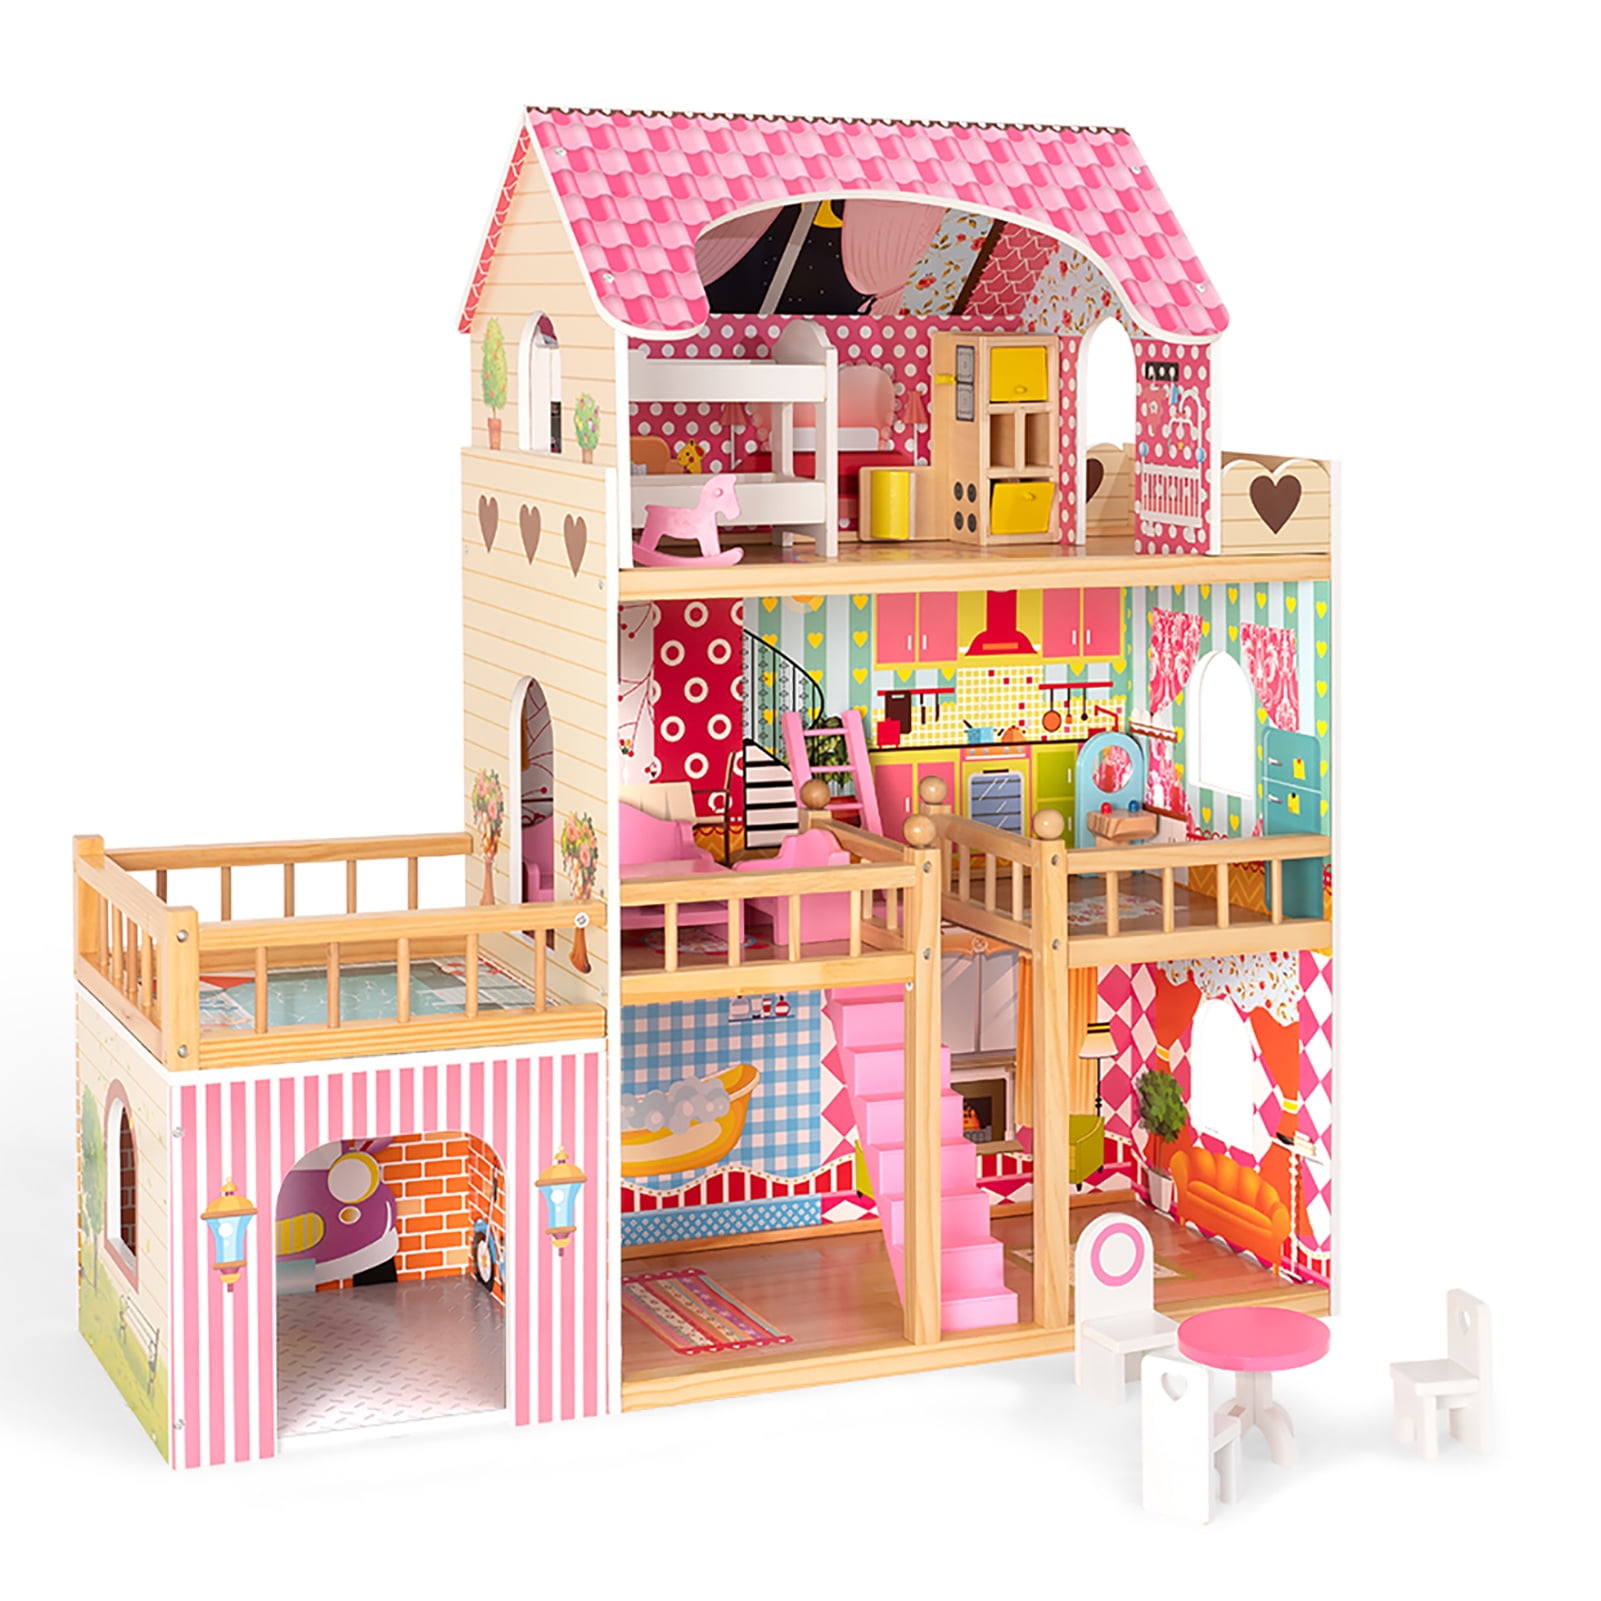 Big Doll House Barbie DreamHouse Toy PlayHouse For Girl w/ 70 Pcs Accessory Gift 